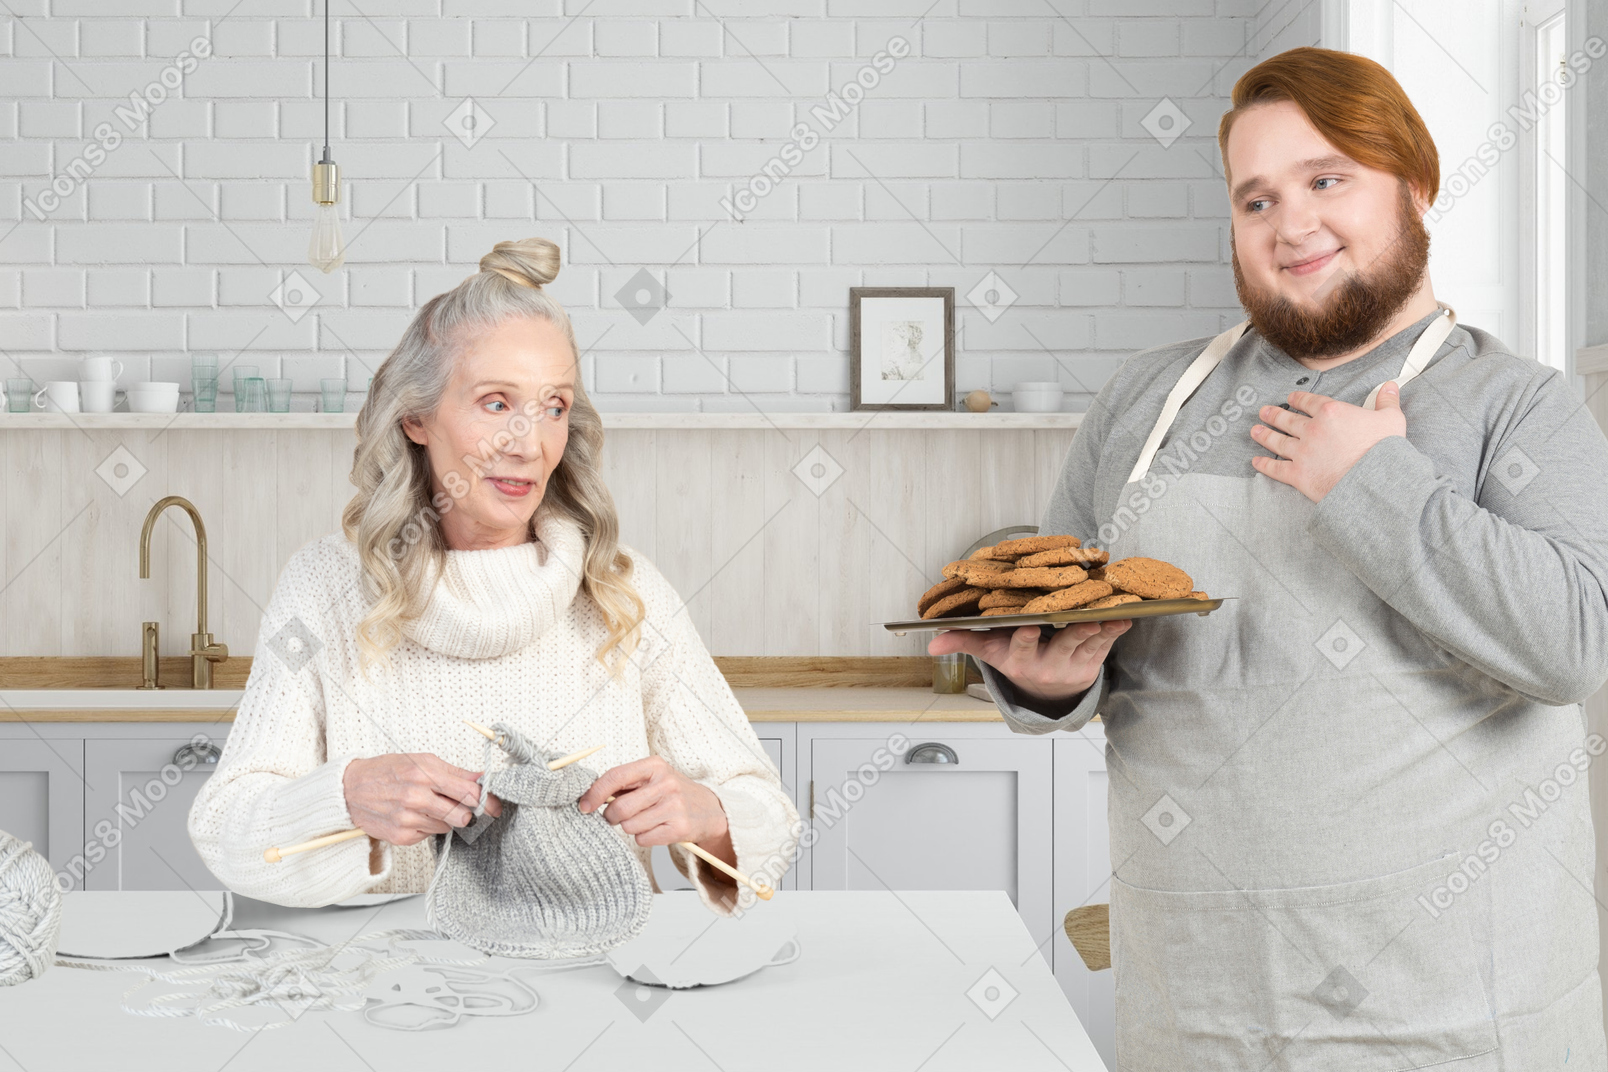 A man with cookies on a plate standing next to an old woman knitting